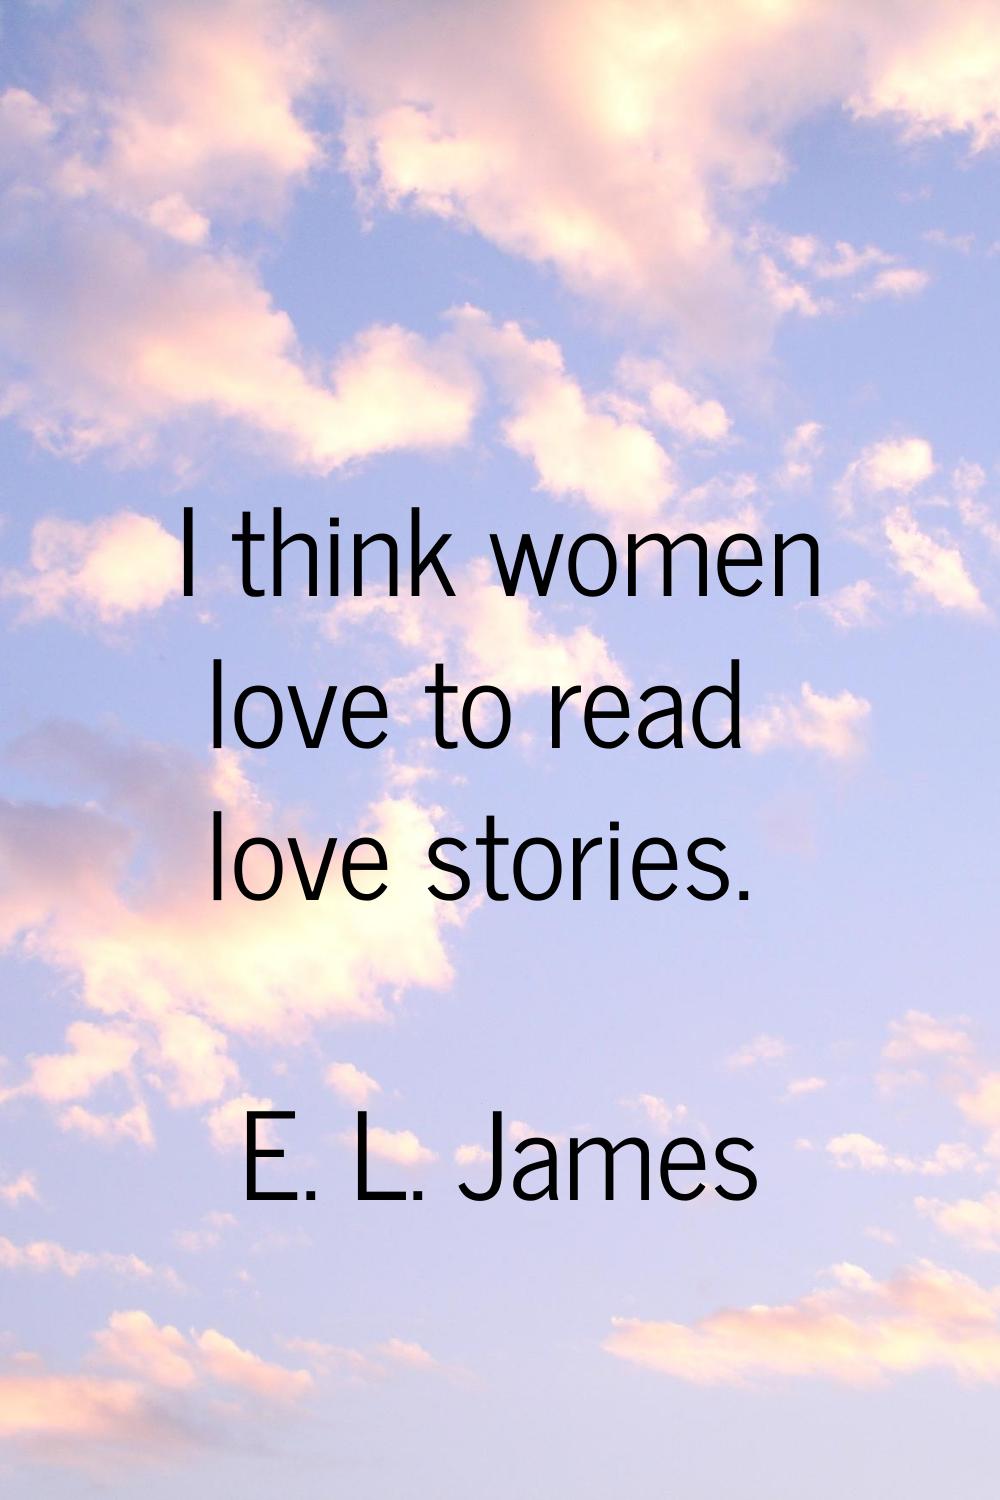 I think women love to read love stories.